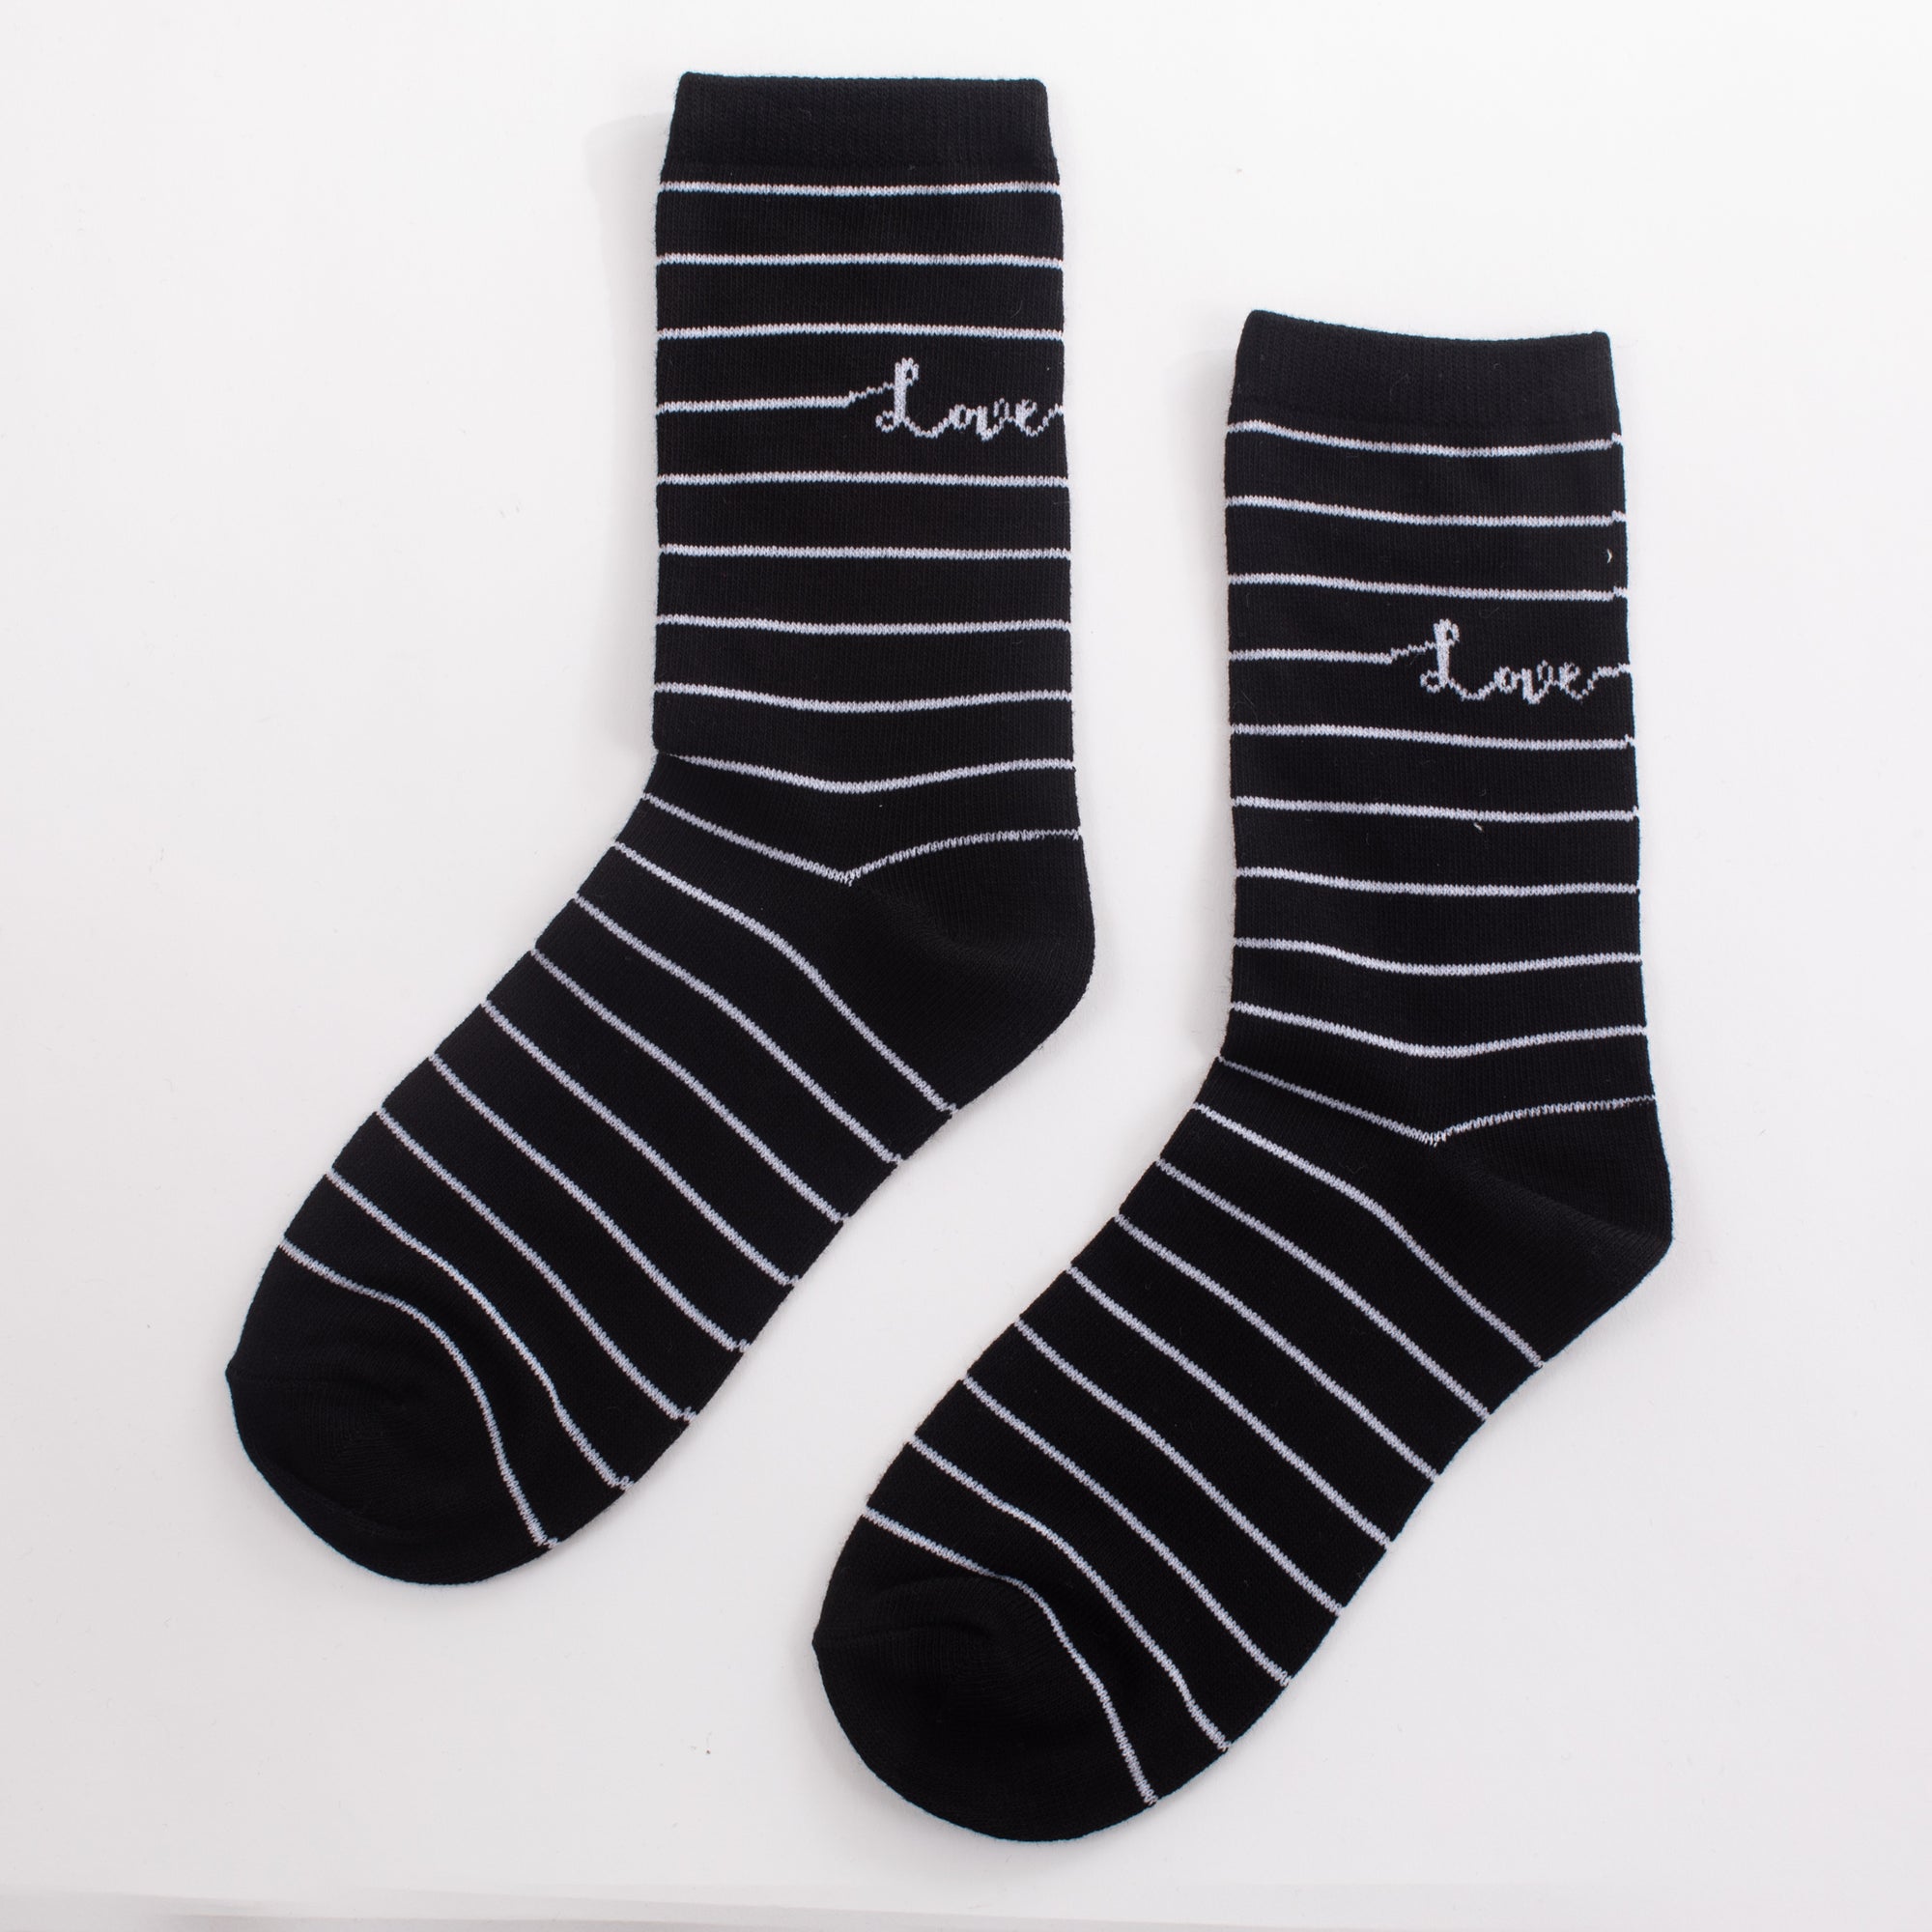 Black sockss with stripes and inscription